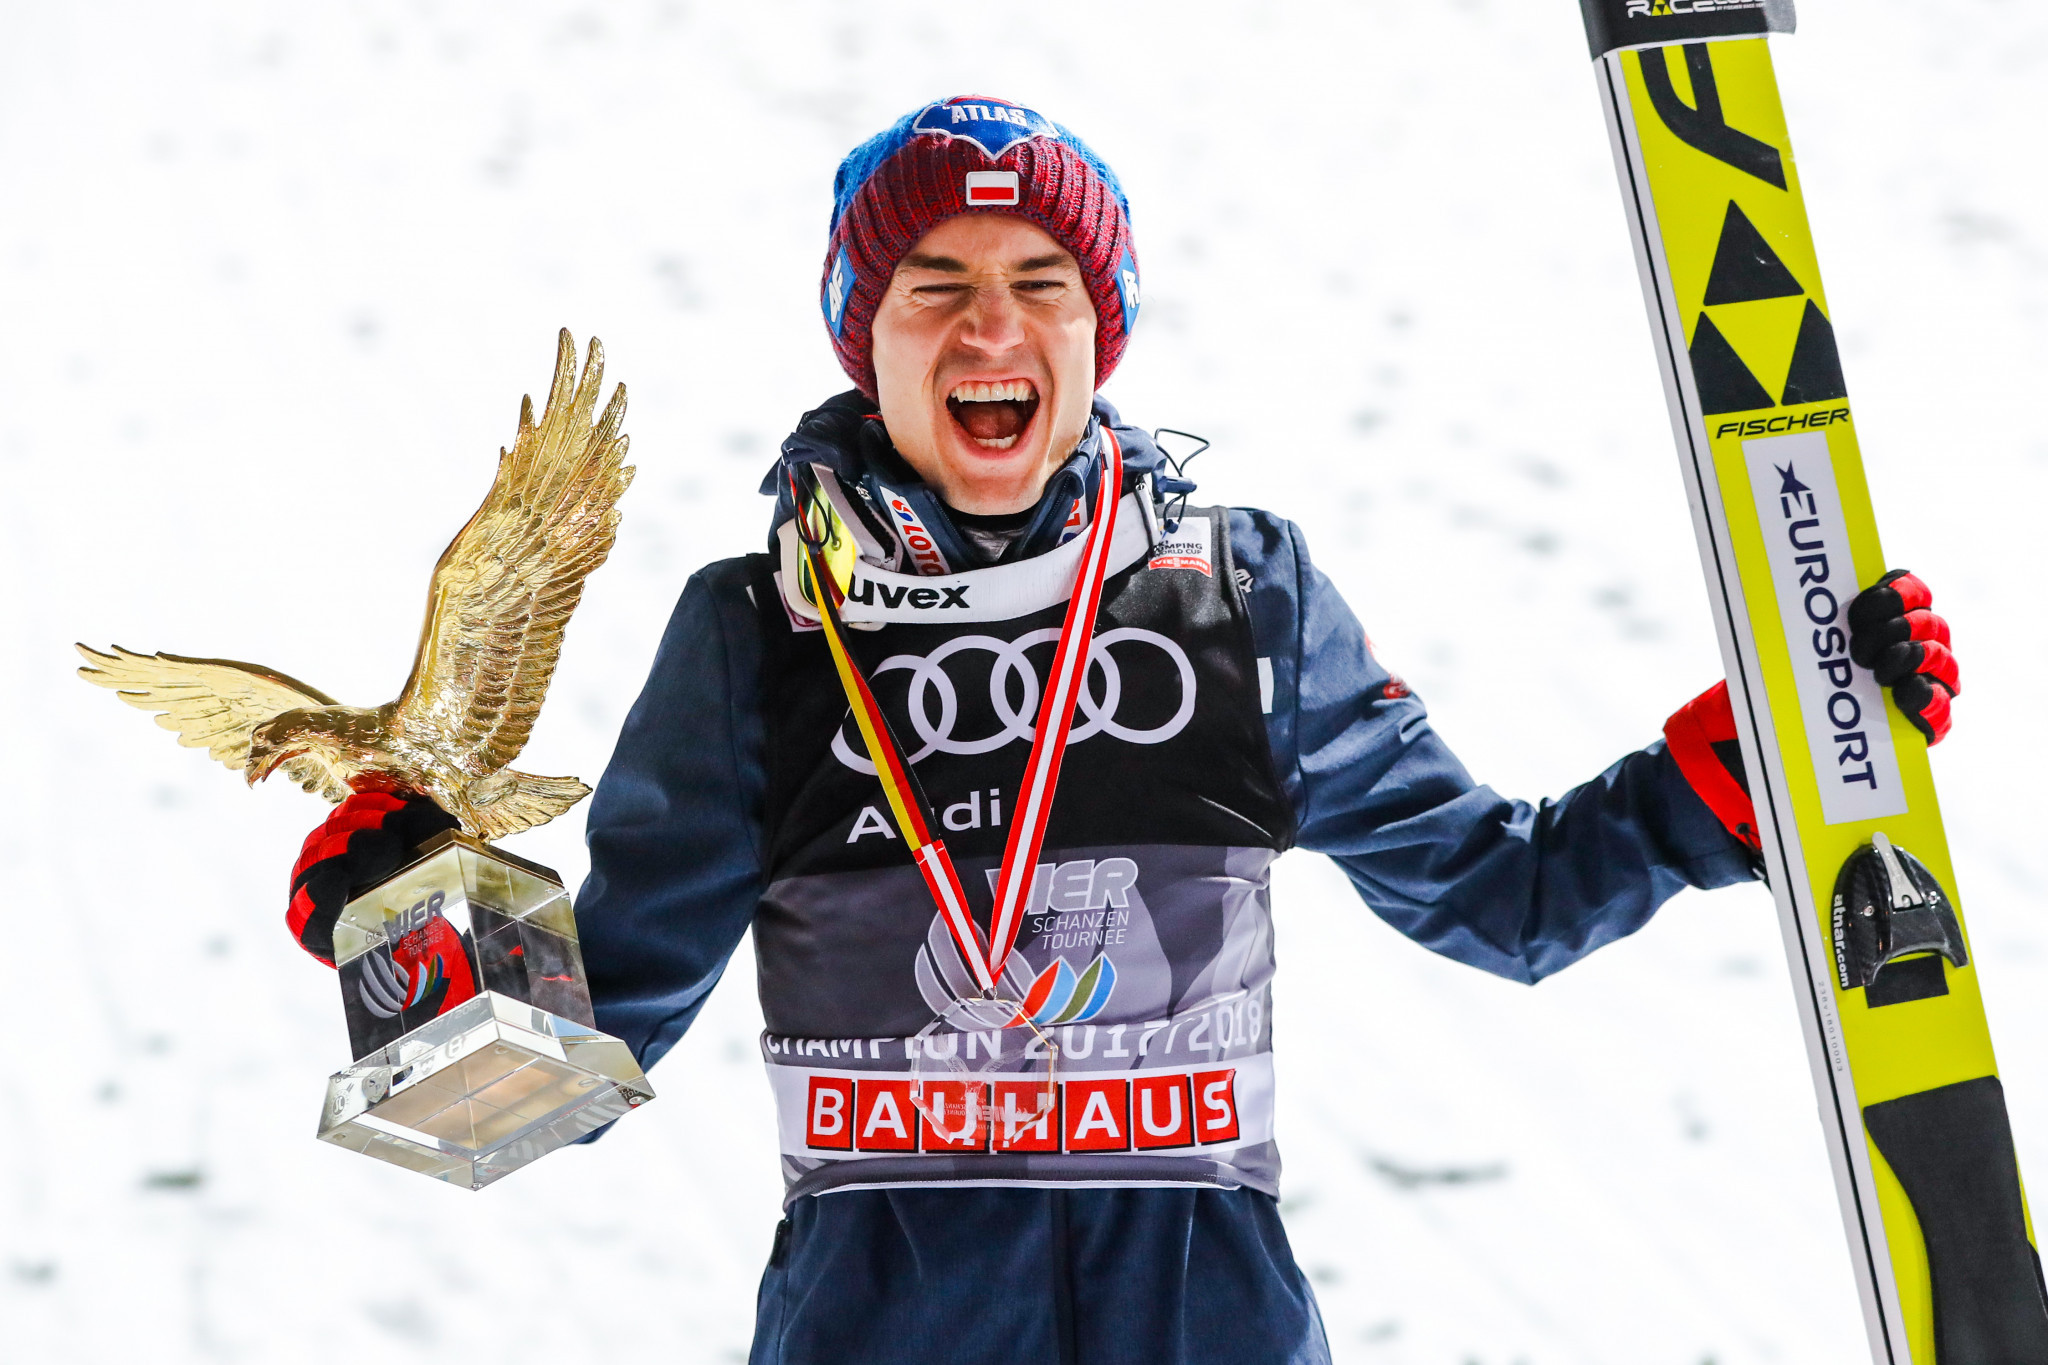 Poland's Kamil Stoch won the Four Hills tournament which ended in January ©Getty Images